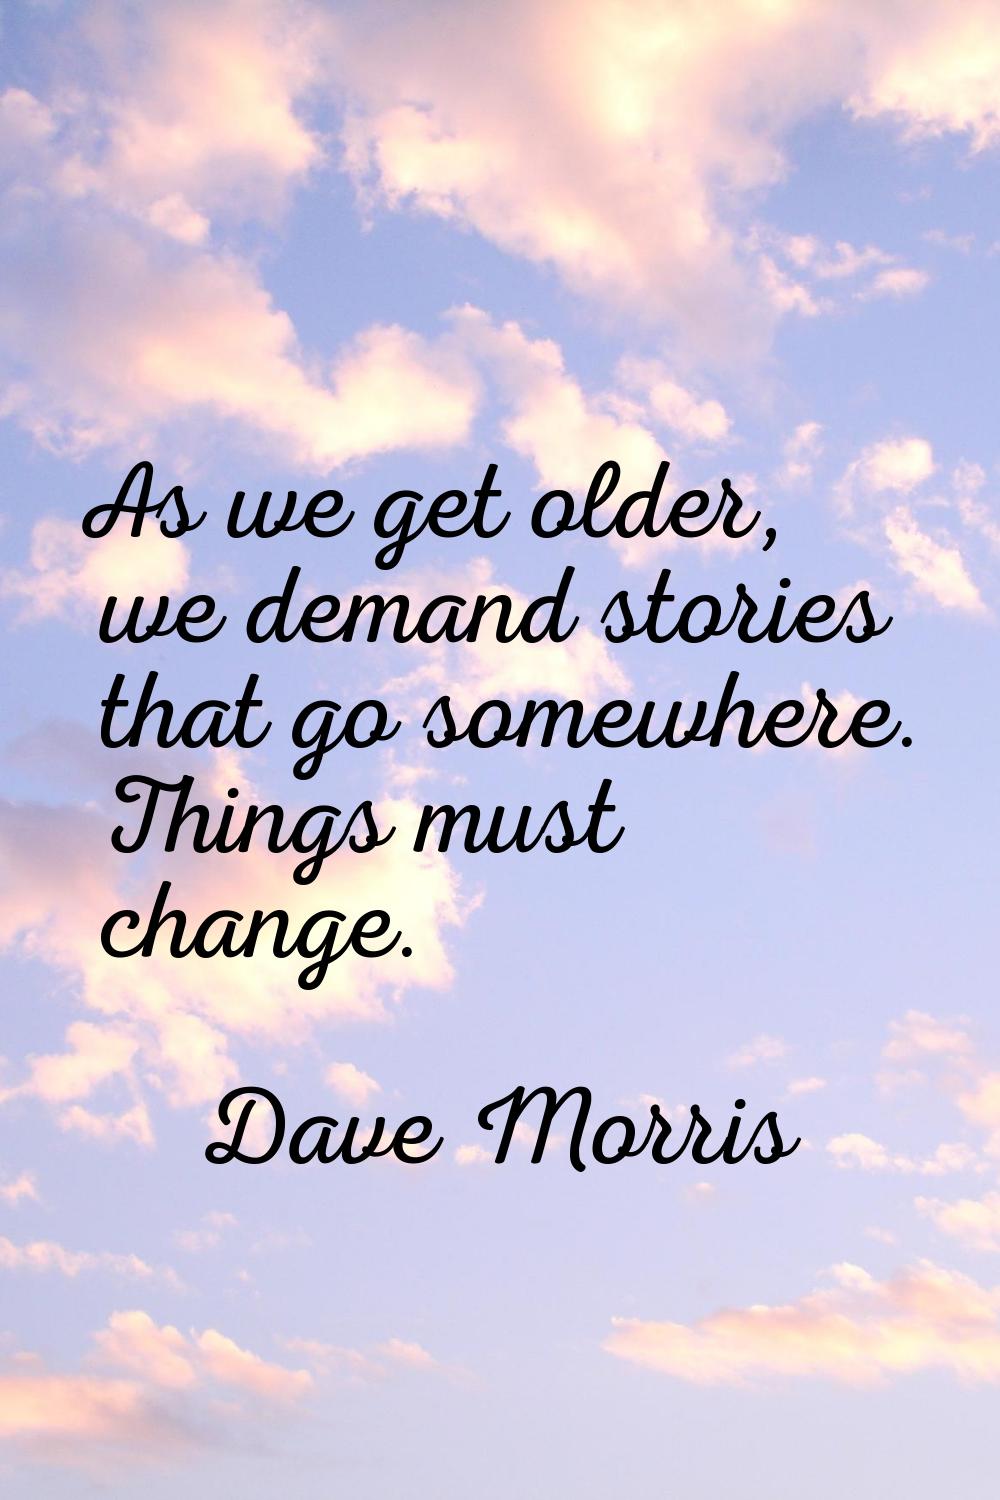 As we get older, we demand stories that go somewhere. Things must change.